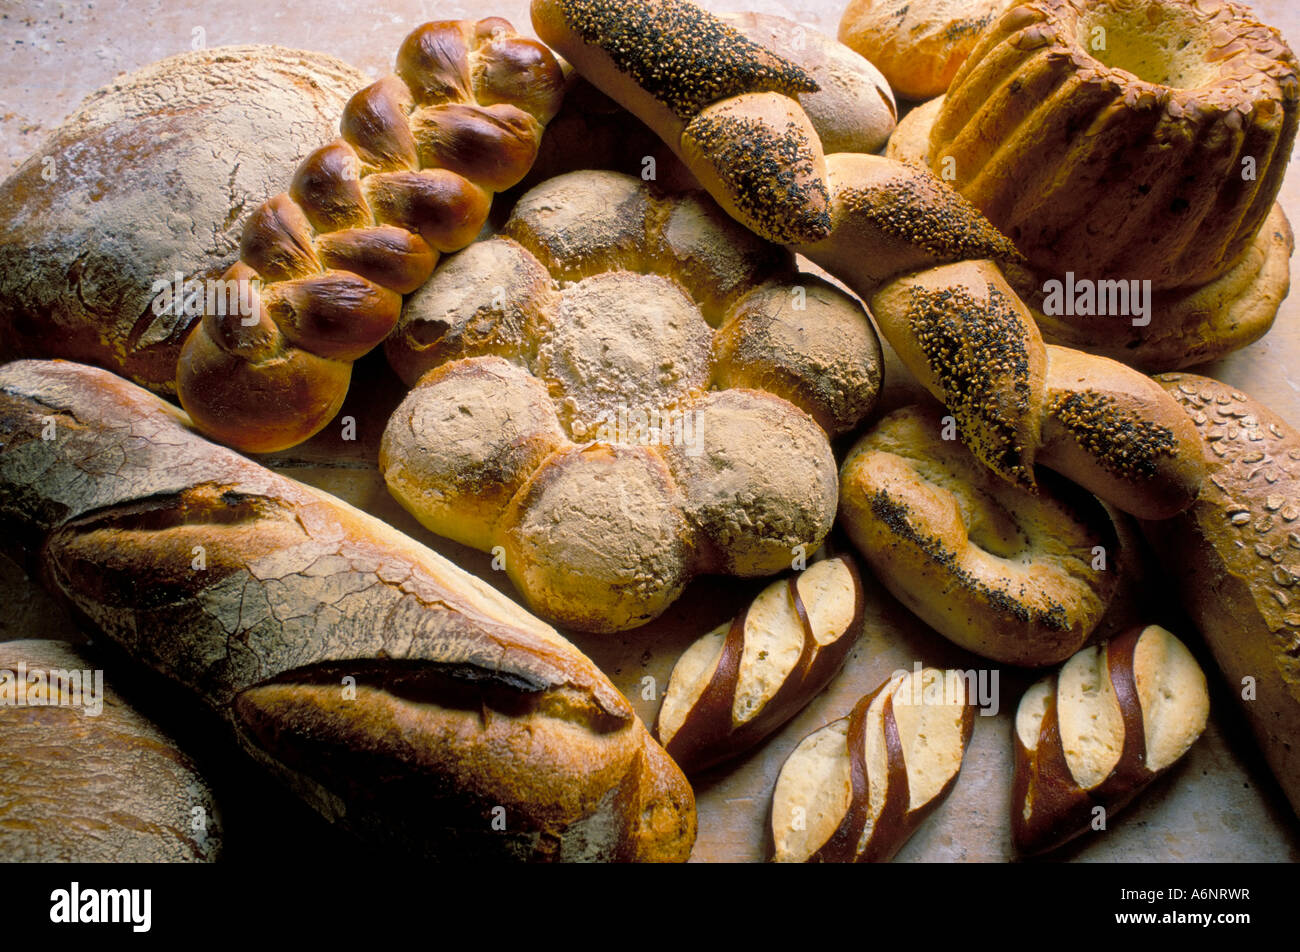 Breads including kugelhopfs pretzels and plaited bread Alsace France Europe Stock Photo